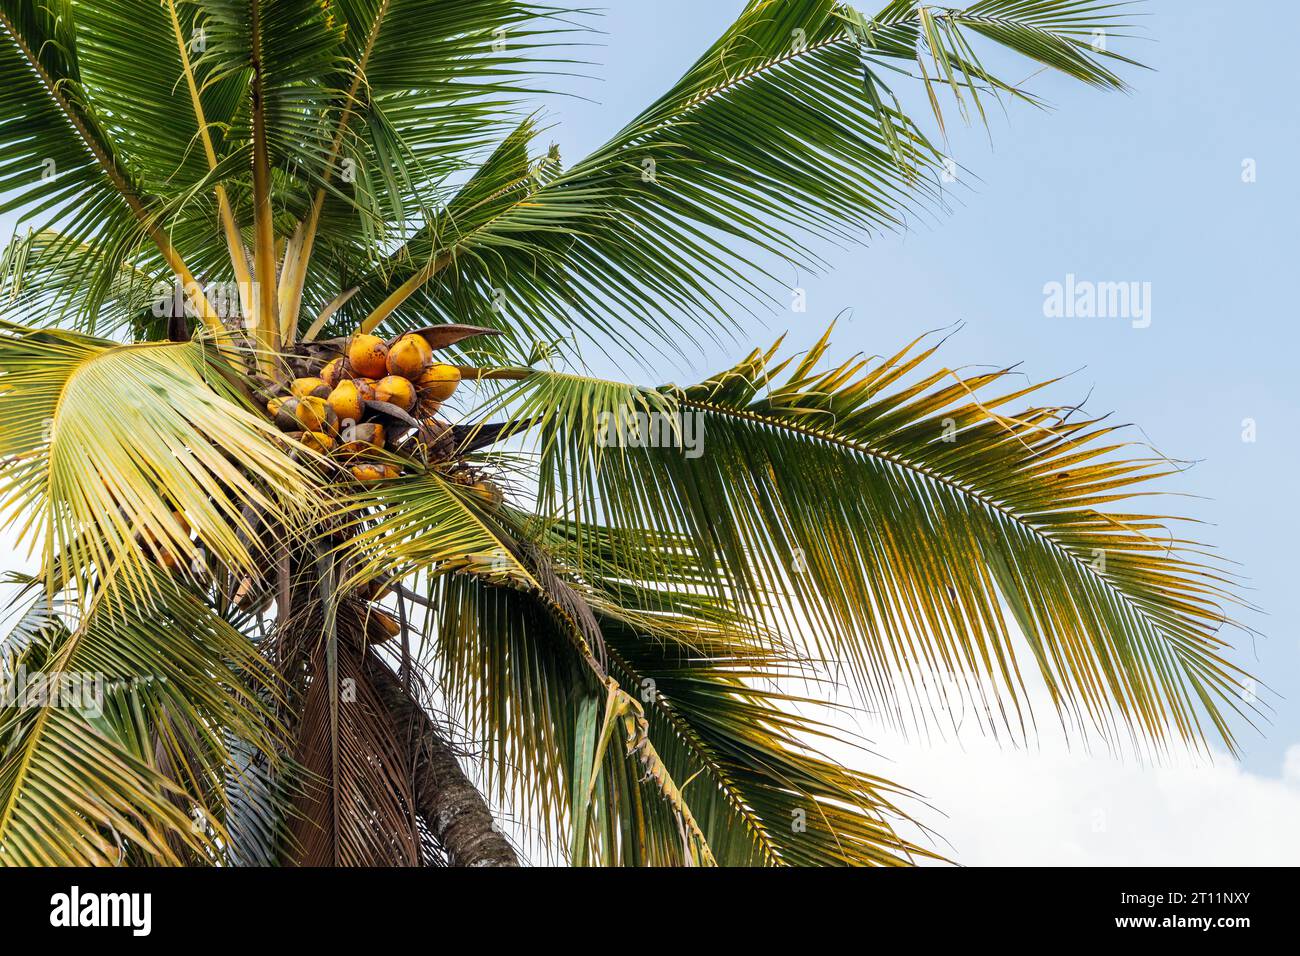 Coconut palm with yellow fruits is under bright blue sky on a sunny day, Cocos nucifera Stock Photo